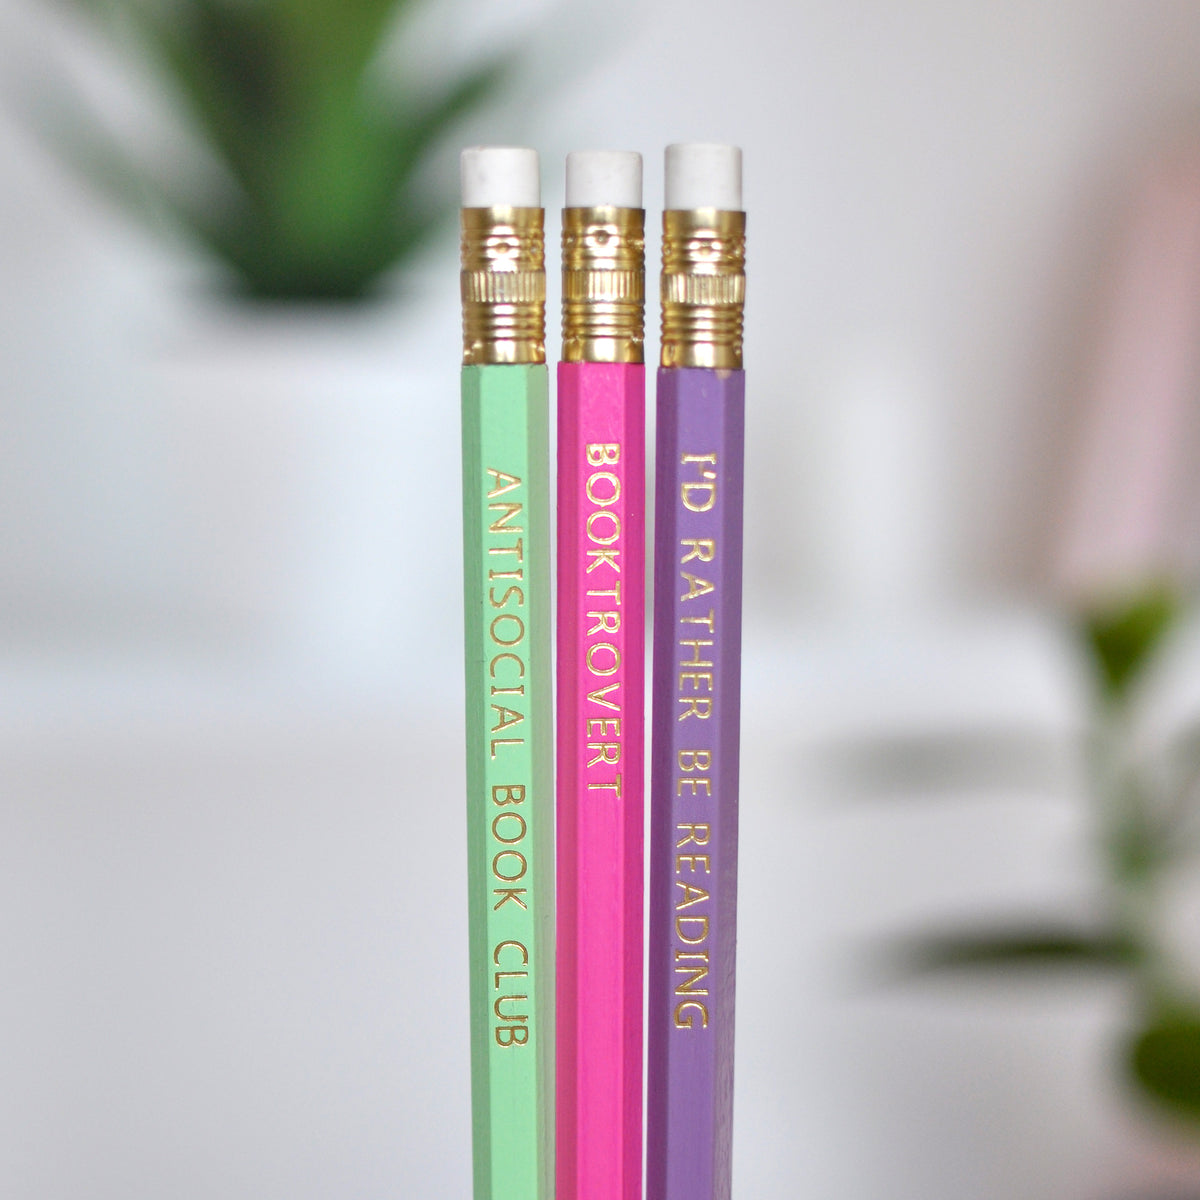 Three Pencils and Bookmark Set for Introvert Book Lovers - Antisocial Book Club, Booktrovert, and I’d Rather Be Reading foil stamped pencils